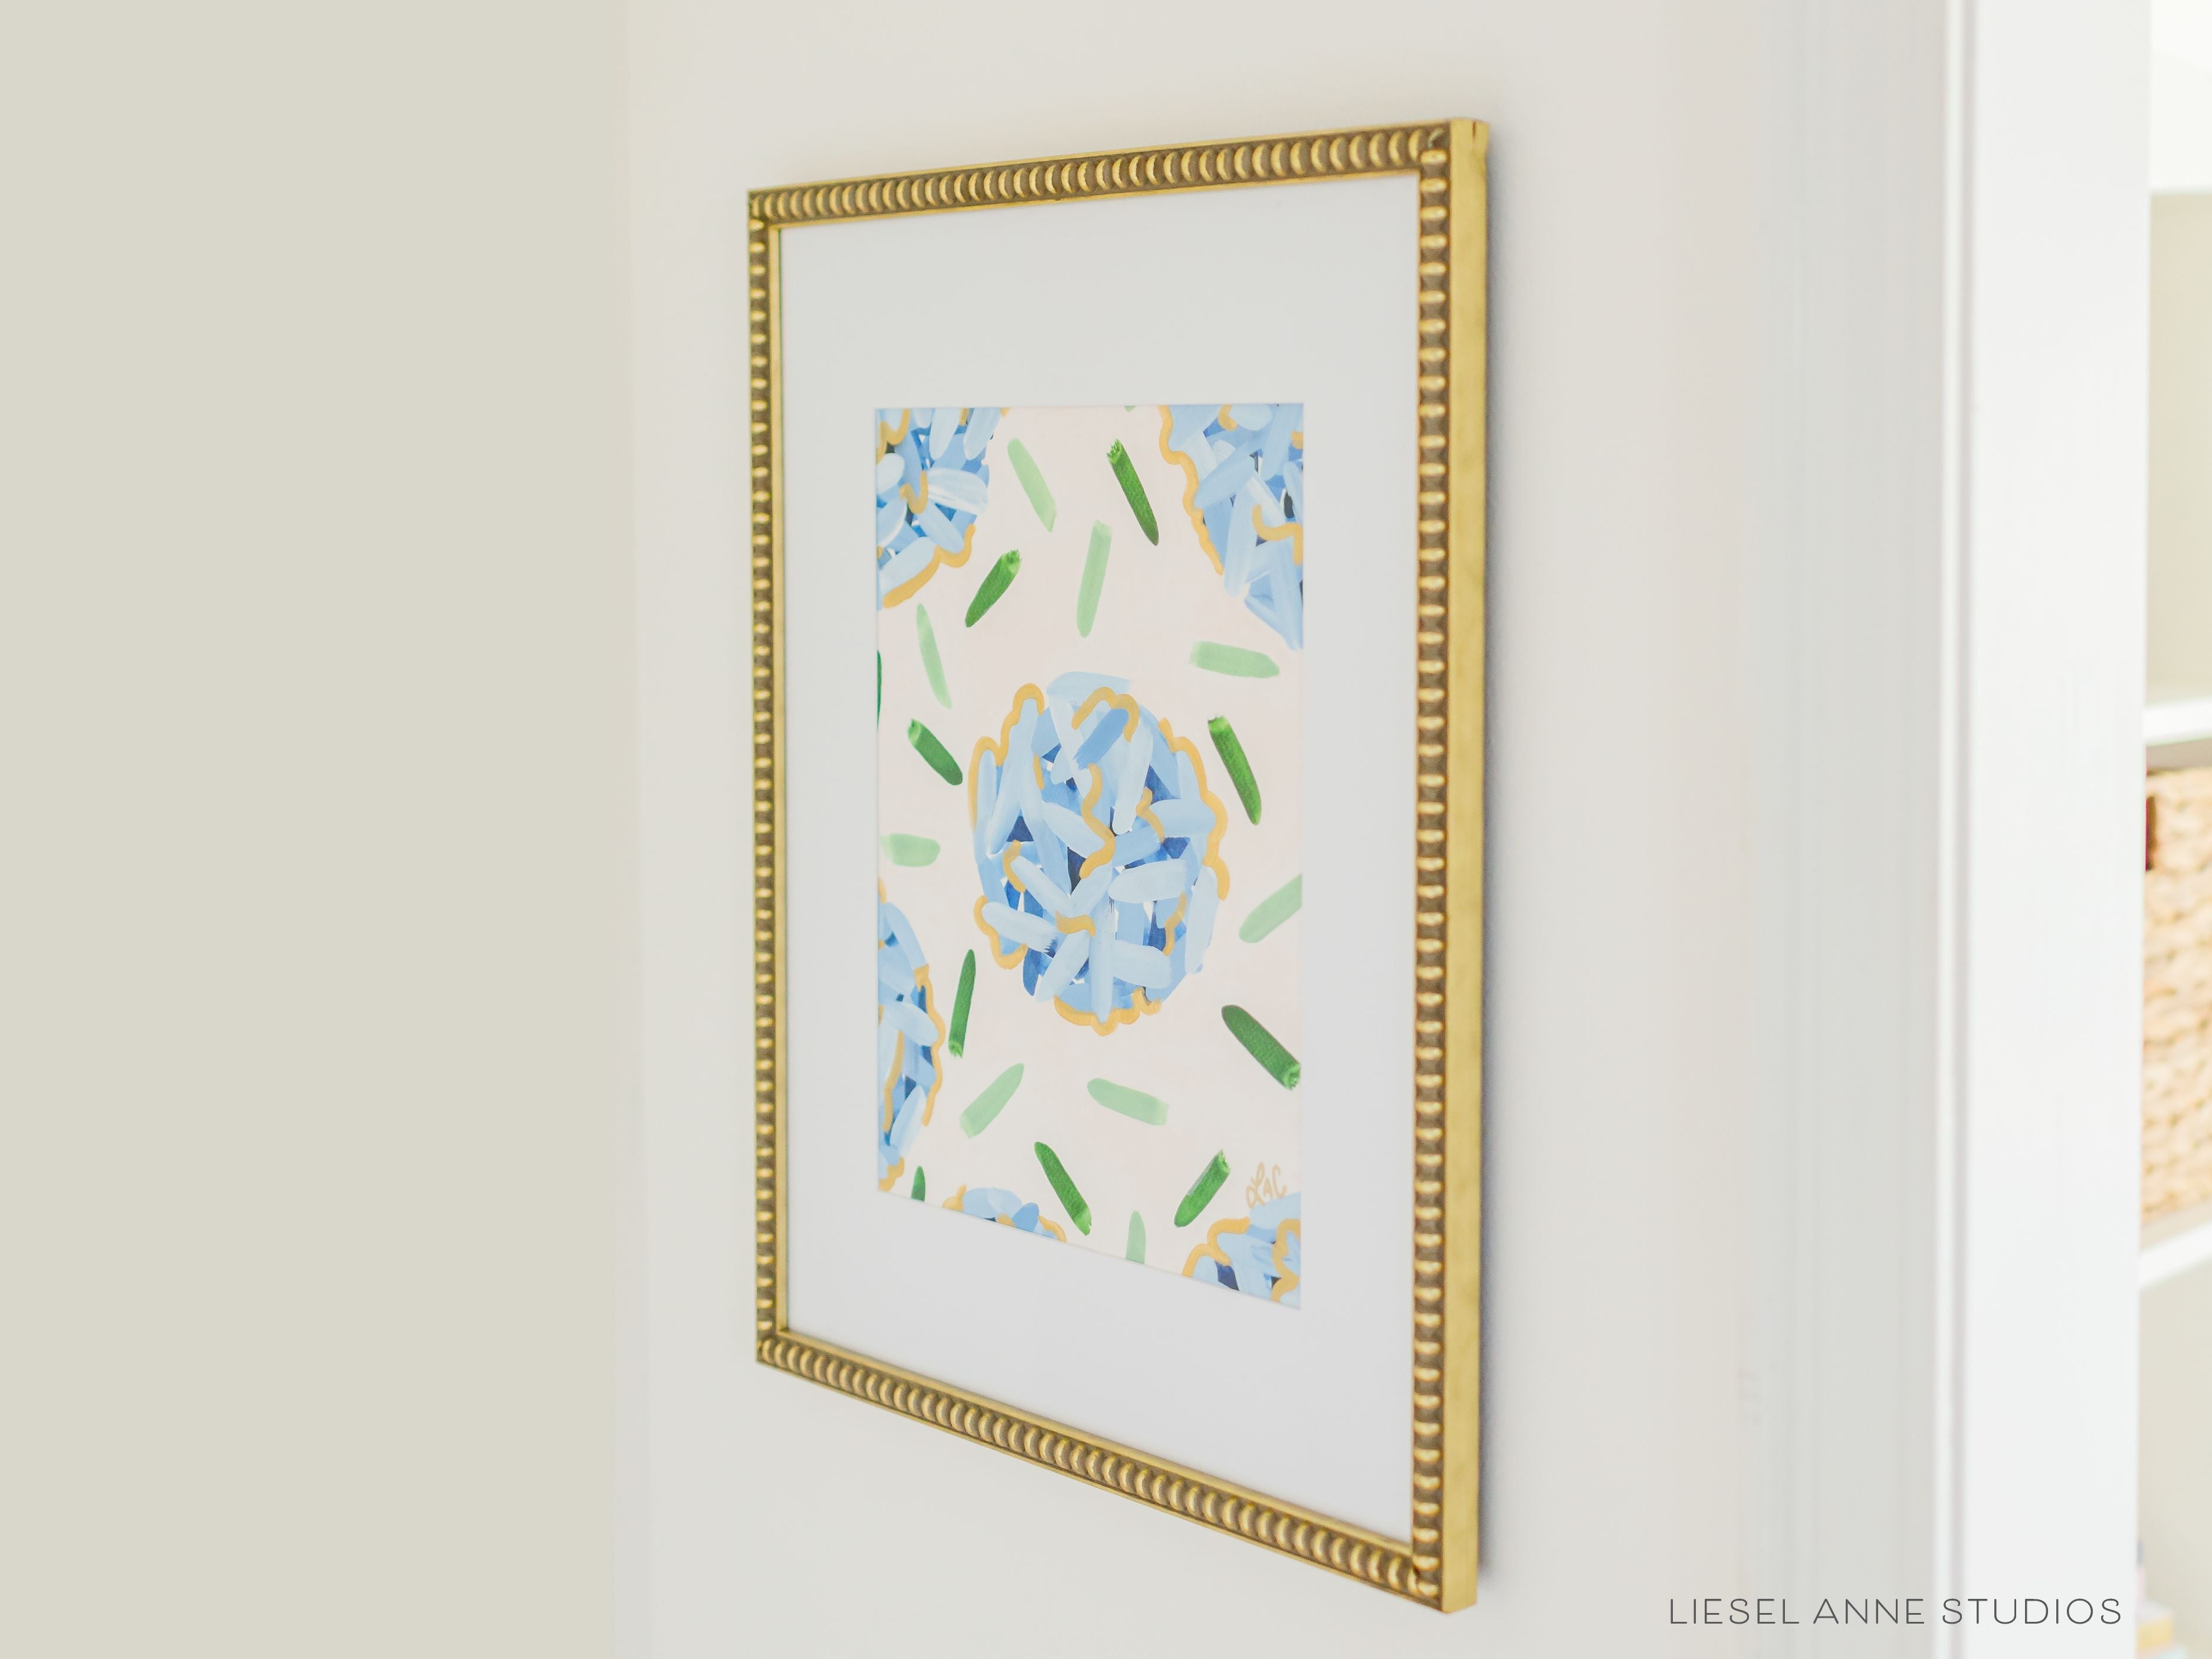 Golden Hydrangea | Blush & Blue VII-Original artwork measures 11"x14" | Hand-Painted with gouache on cold press watercolor paper | Matted and framed in gold wood frame sized 16"x20" | Glare-resistant glass | Hanging hardware included | Features our signature Golden Hydrangea design with a pale pink base, blue hydrangeas and shimmery gold accents | Initialed in gold by the Liesel Anne (the artist) on the front and signed and dated on the back.-The Singing Little Bird